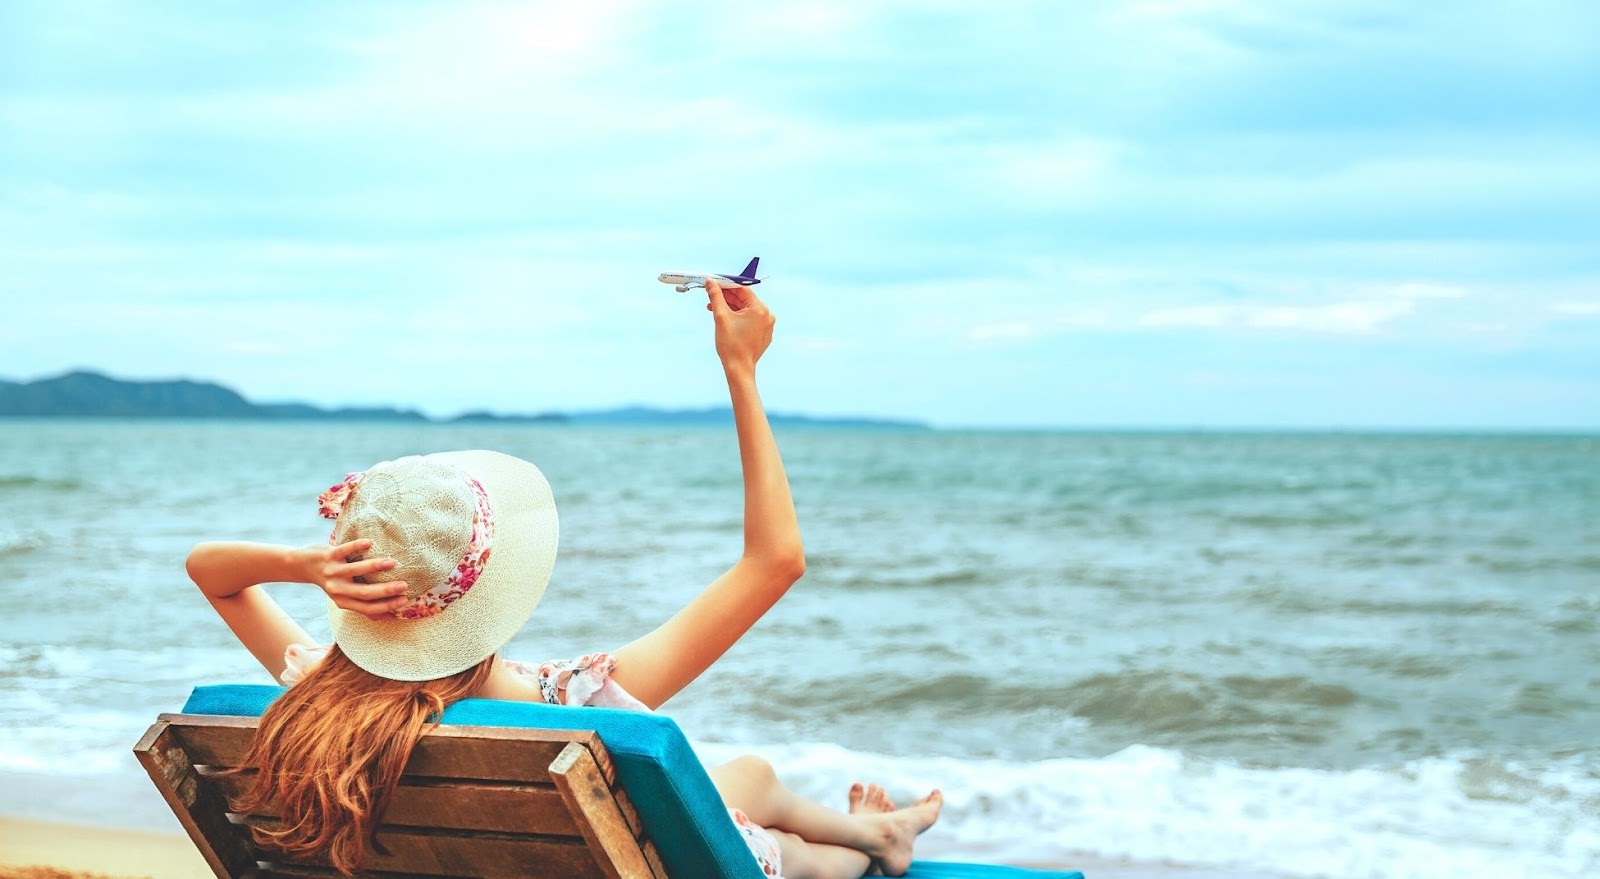 View of woman lounging on a sea bench with a toy plane in her hand.